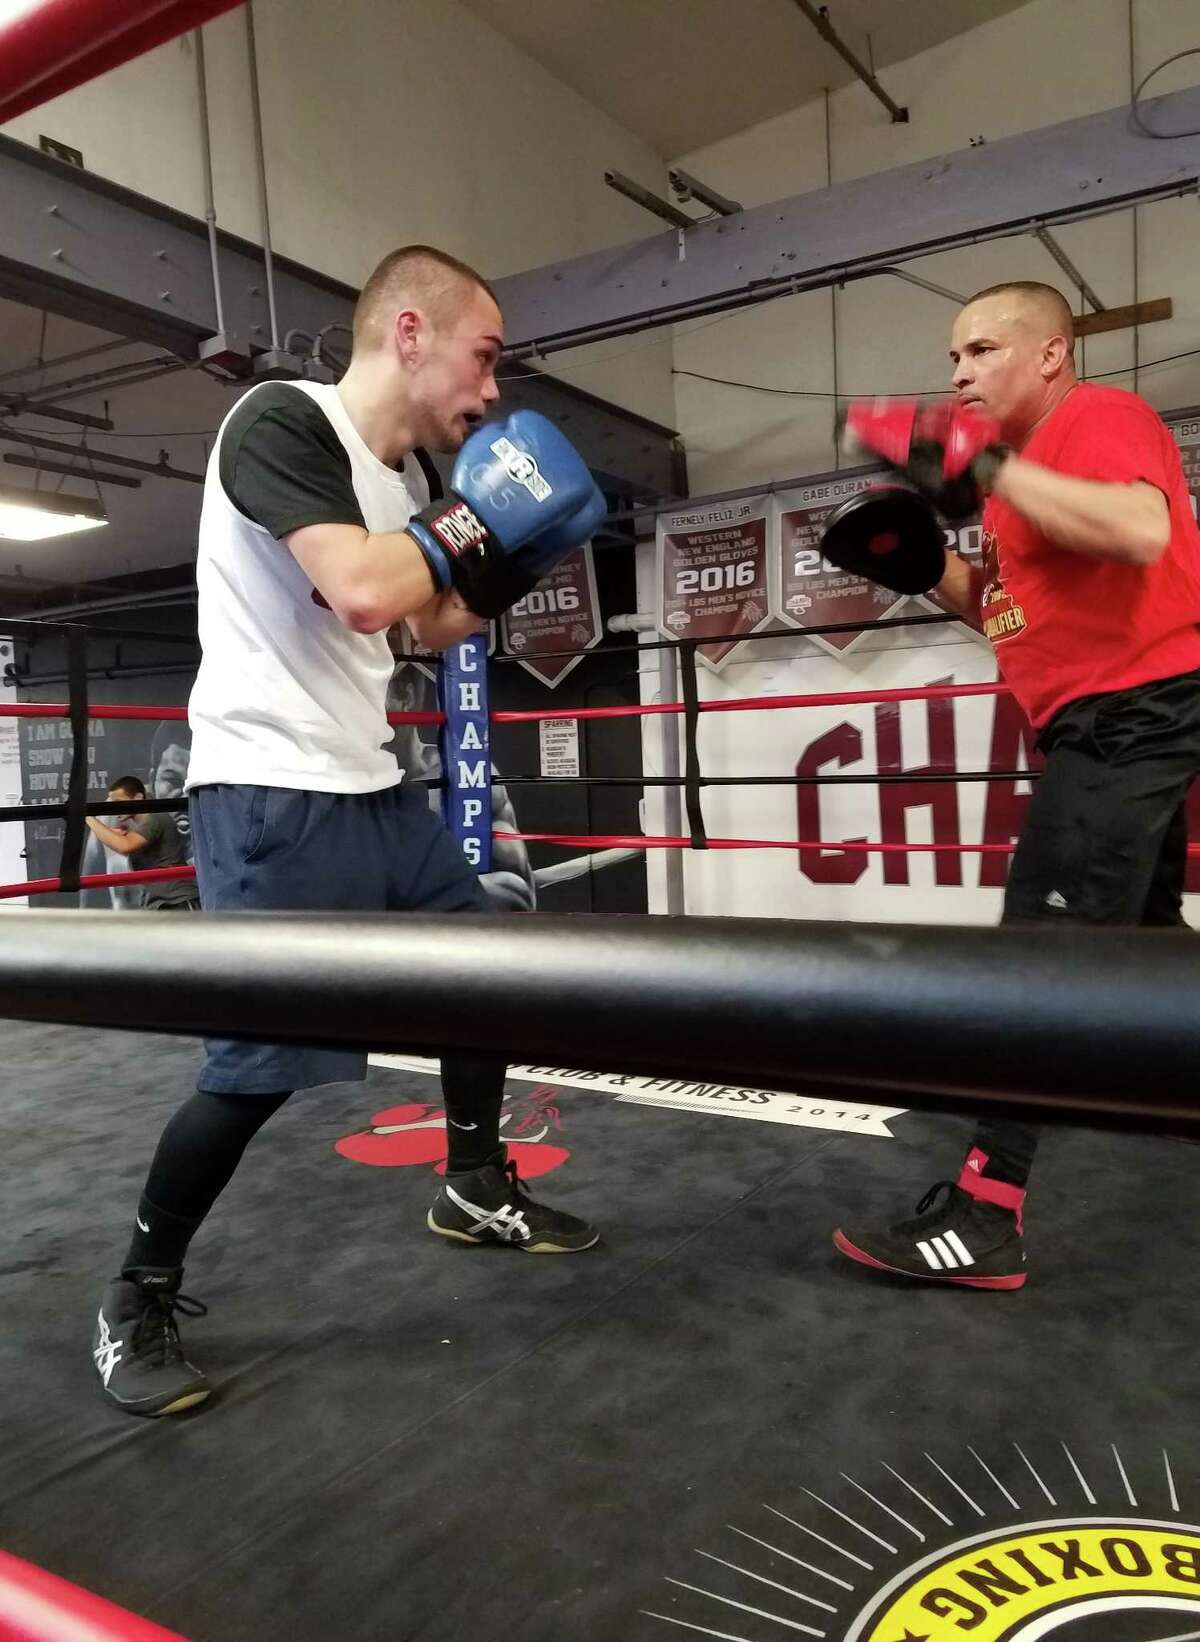 Mahopac native Ryan Smith, left, will represent Danbury's Champs Boxing Club next week at the 2017 Ringside World Championships.